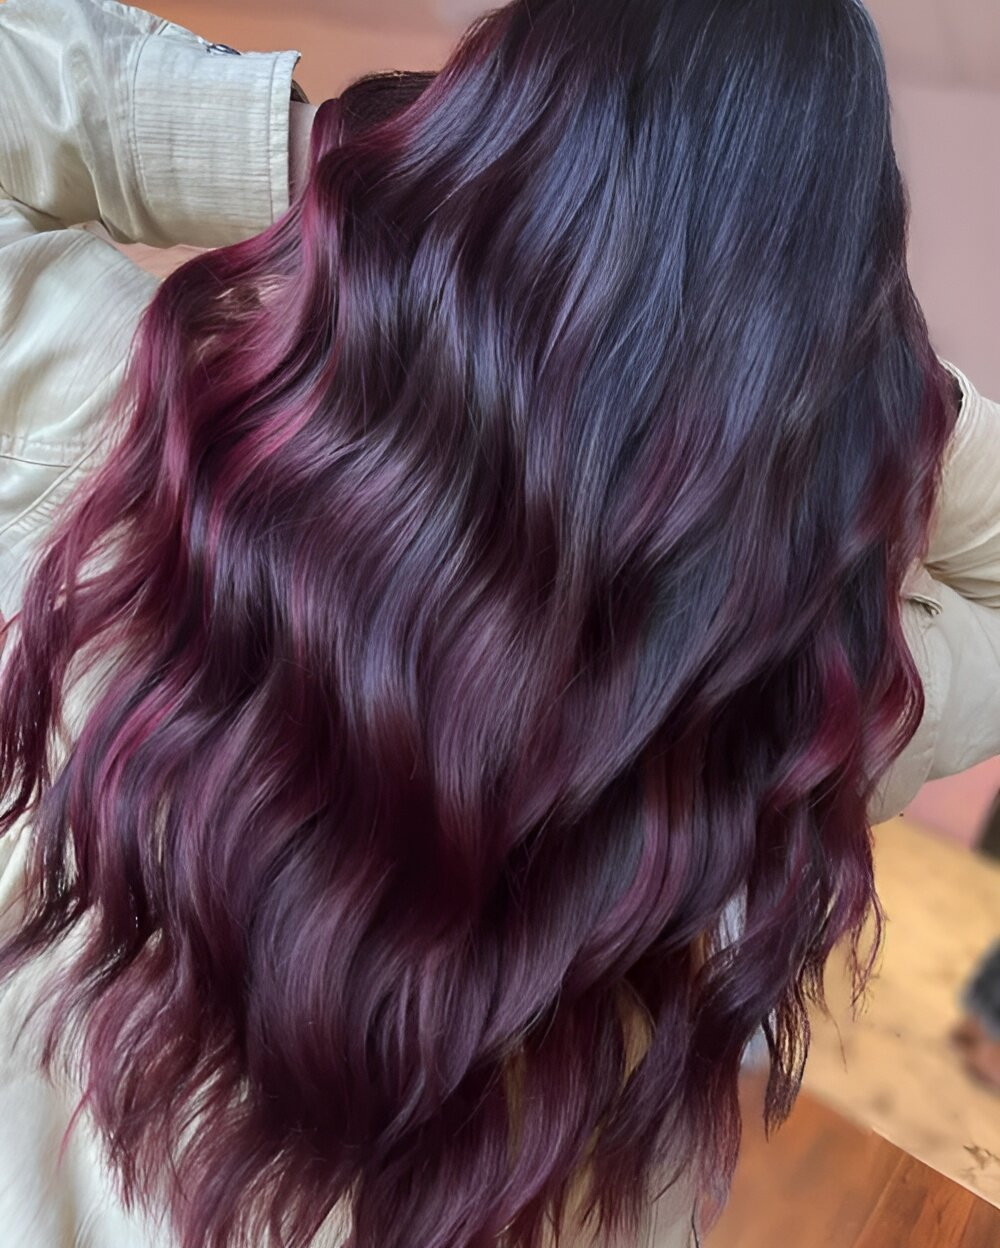 Become A Model With These 27 Gorgeous Plum Hair Color Ideas - 225